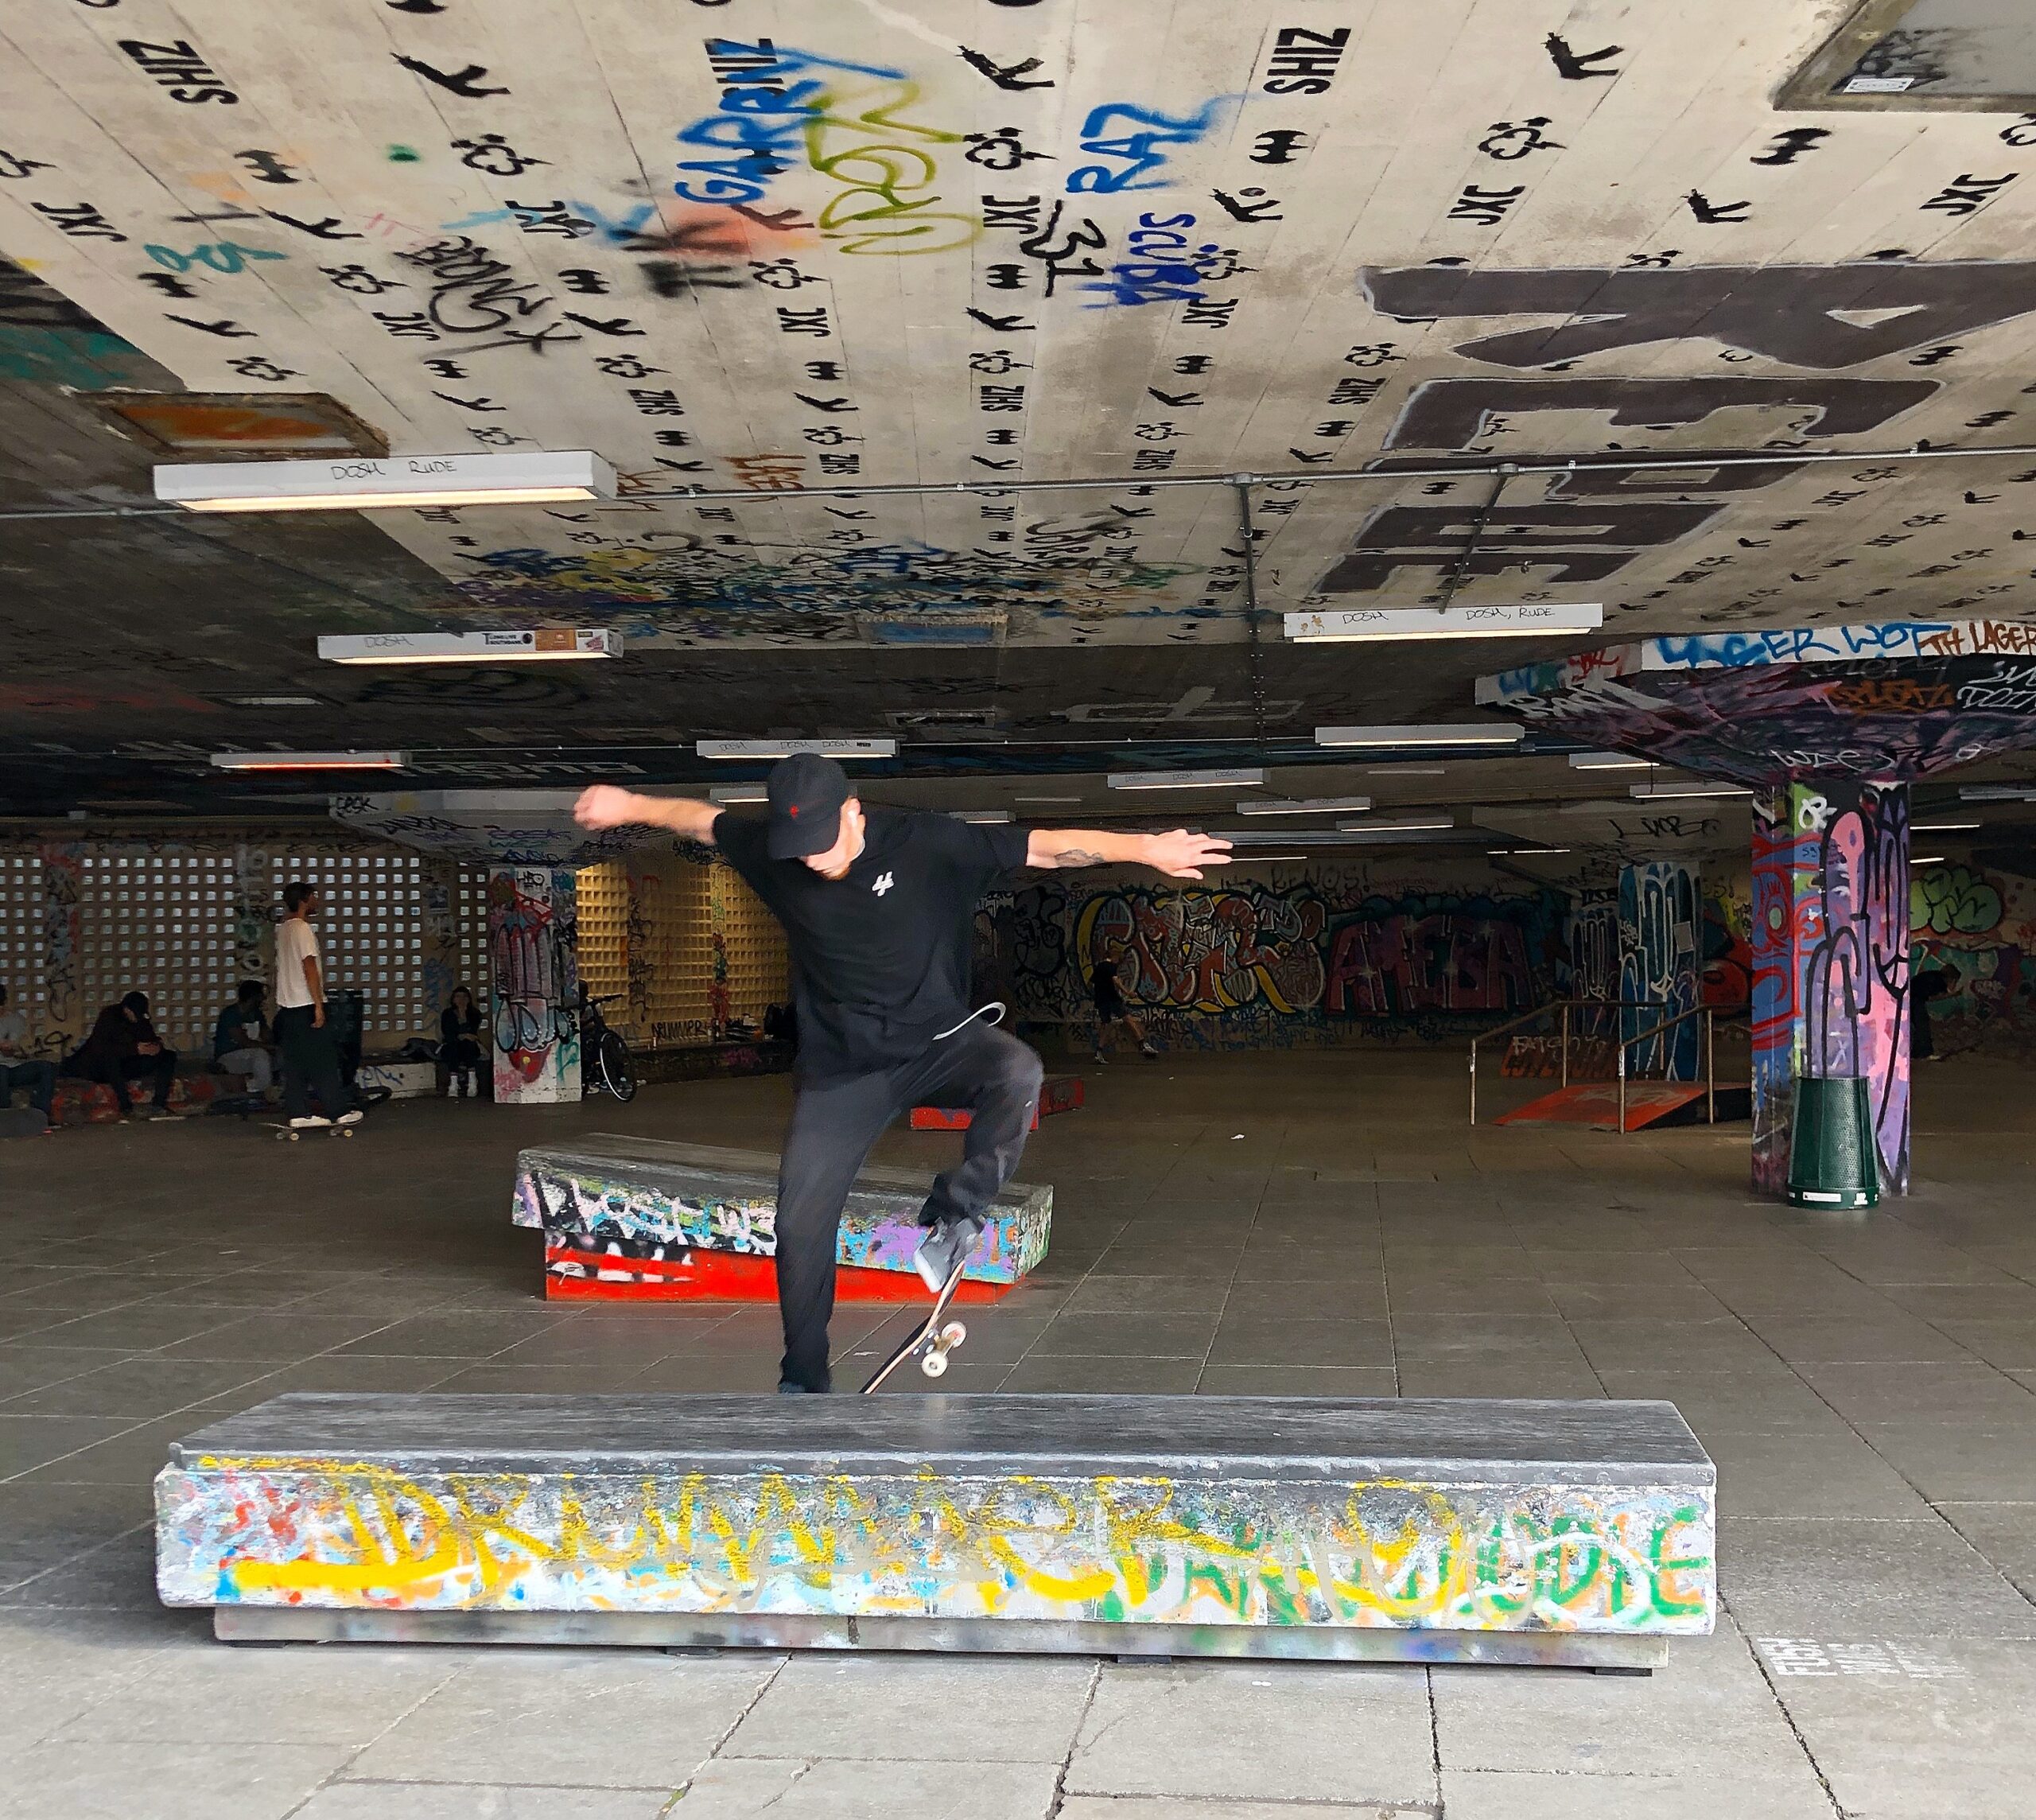 Man Skateboarding on a rail at theSouth Bank Undercroft Skate Park